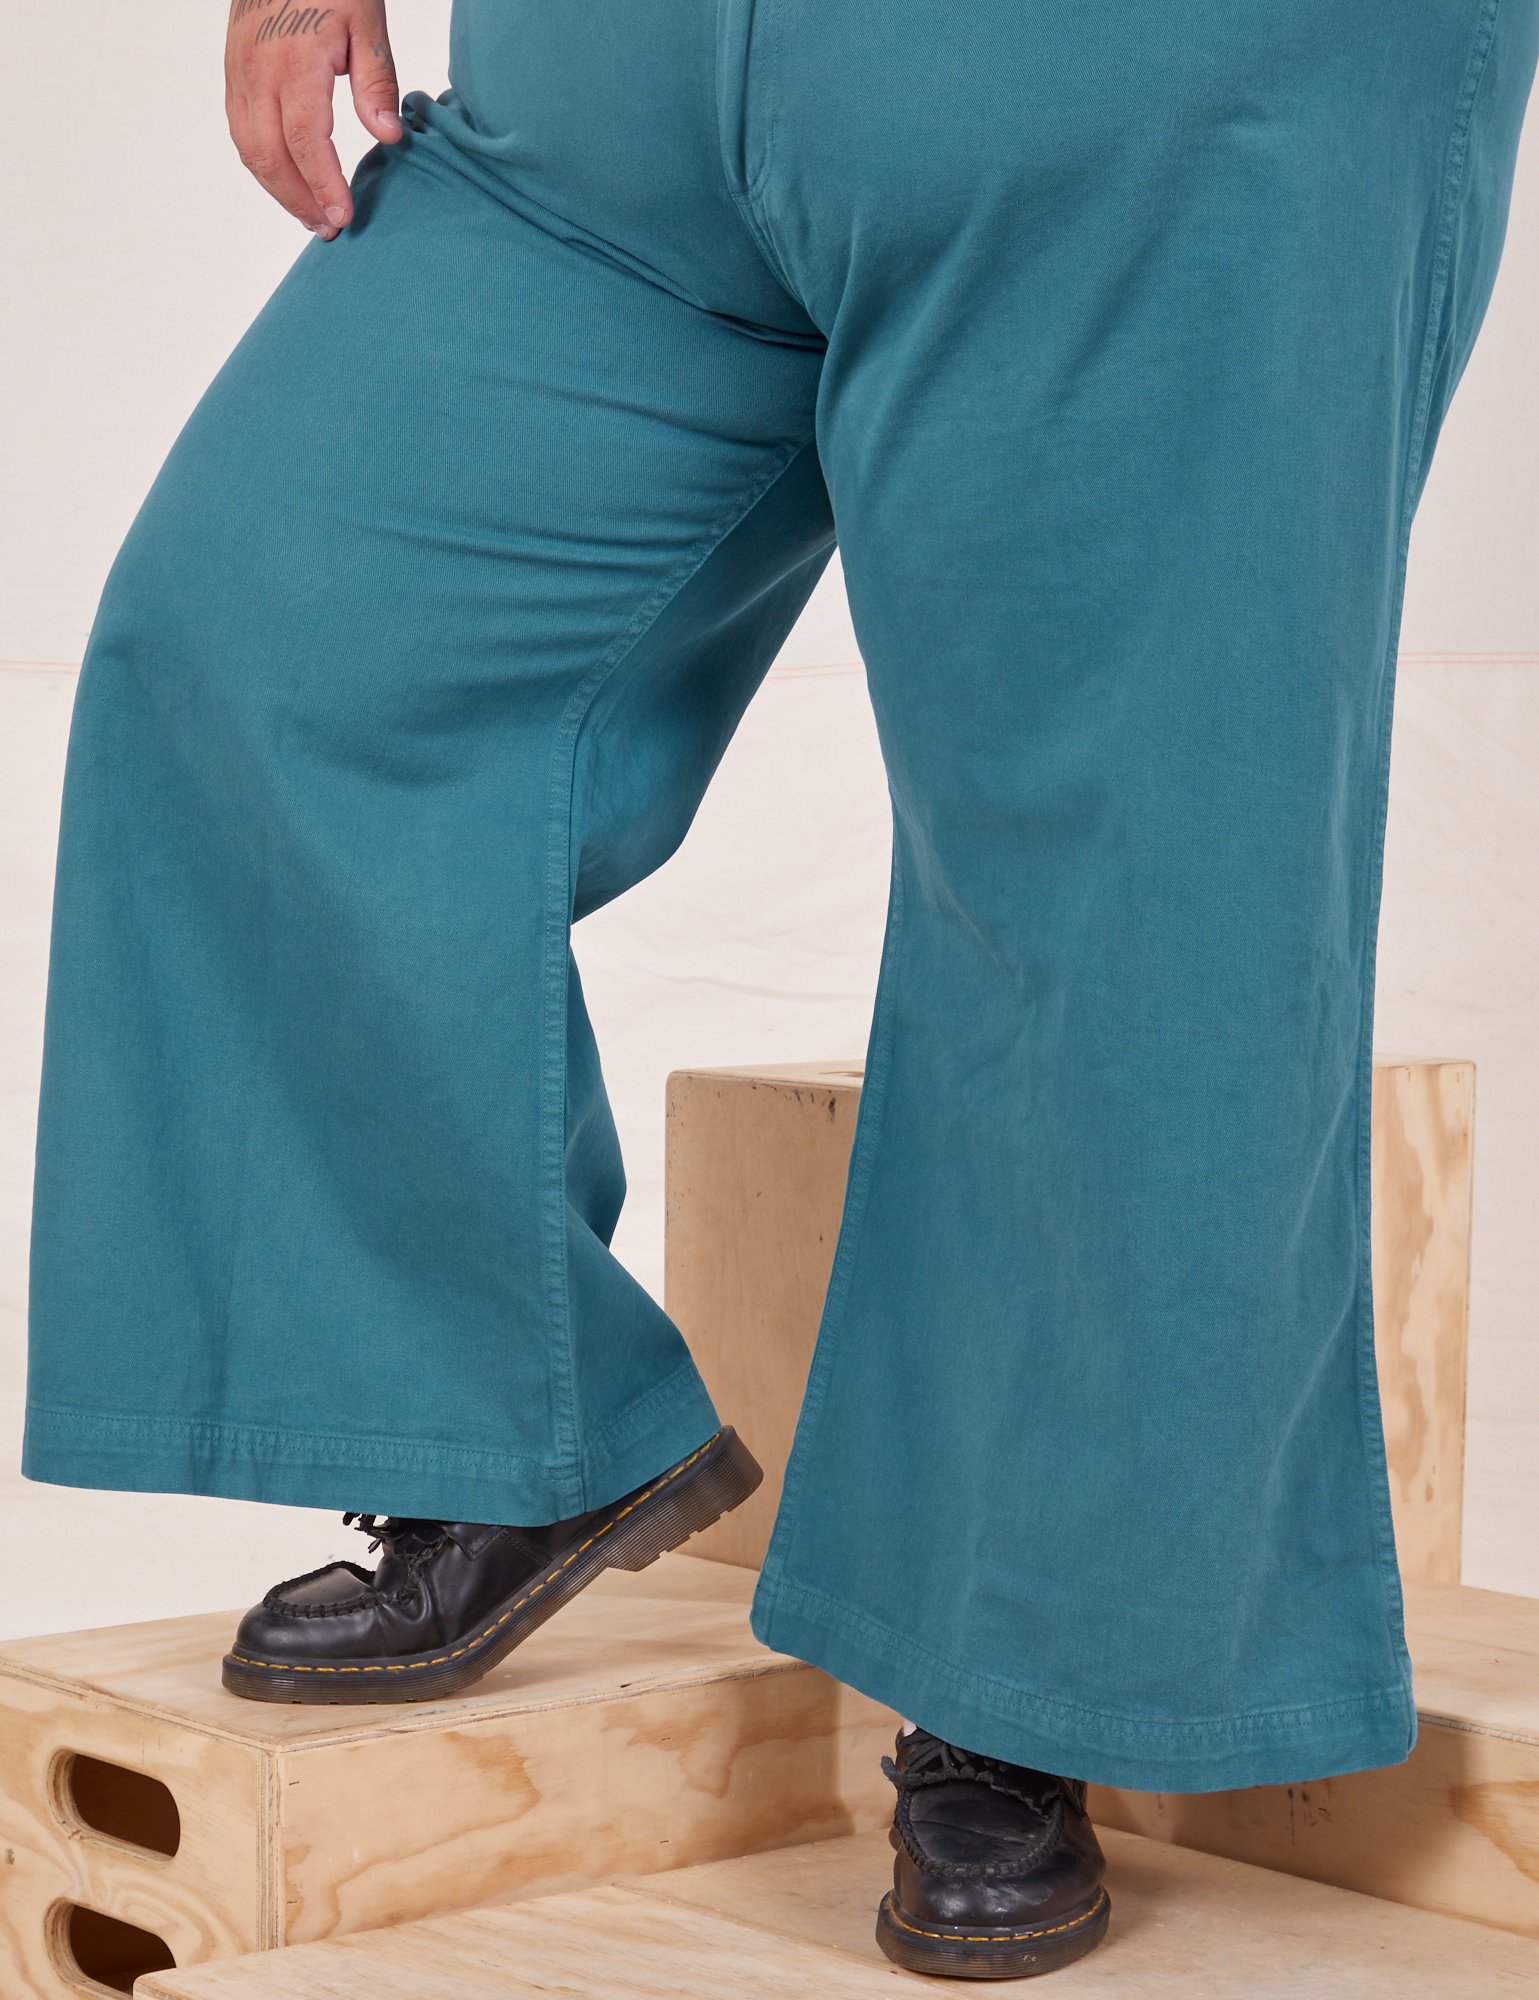 Bell Bottoms in Marine Blue pant leg close up on Sam